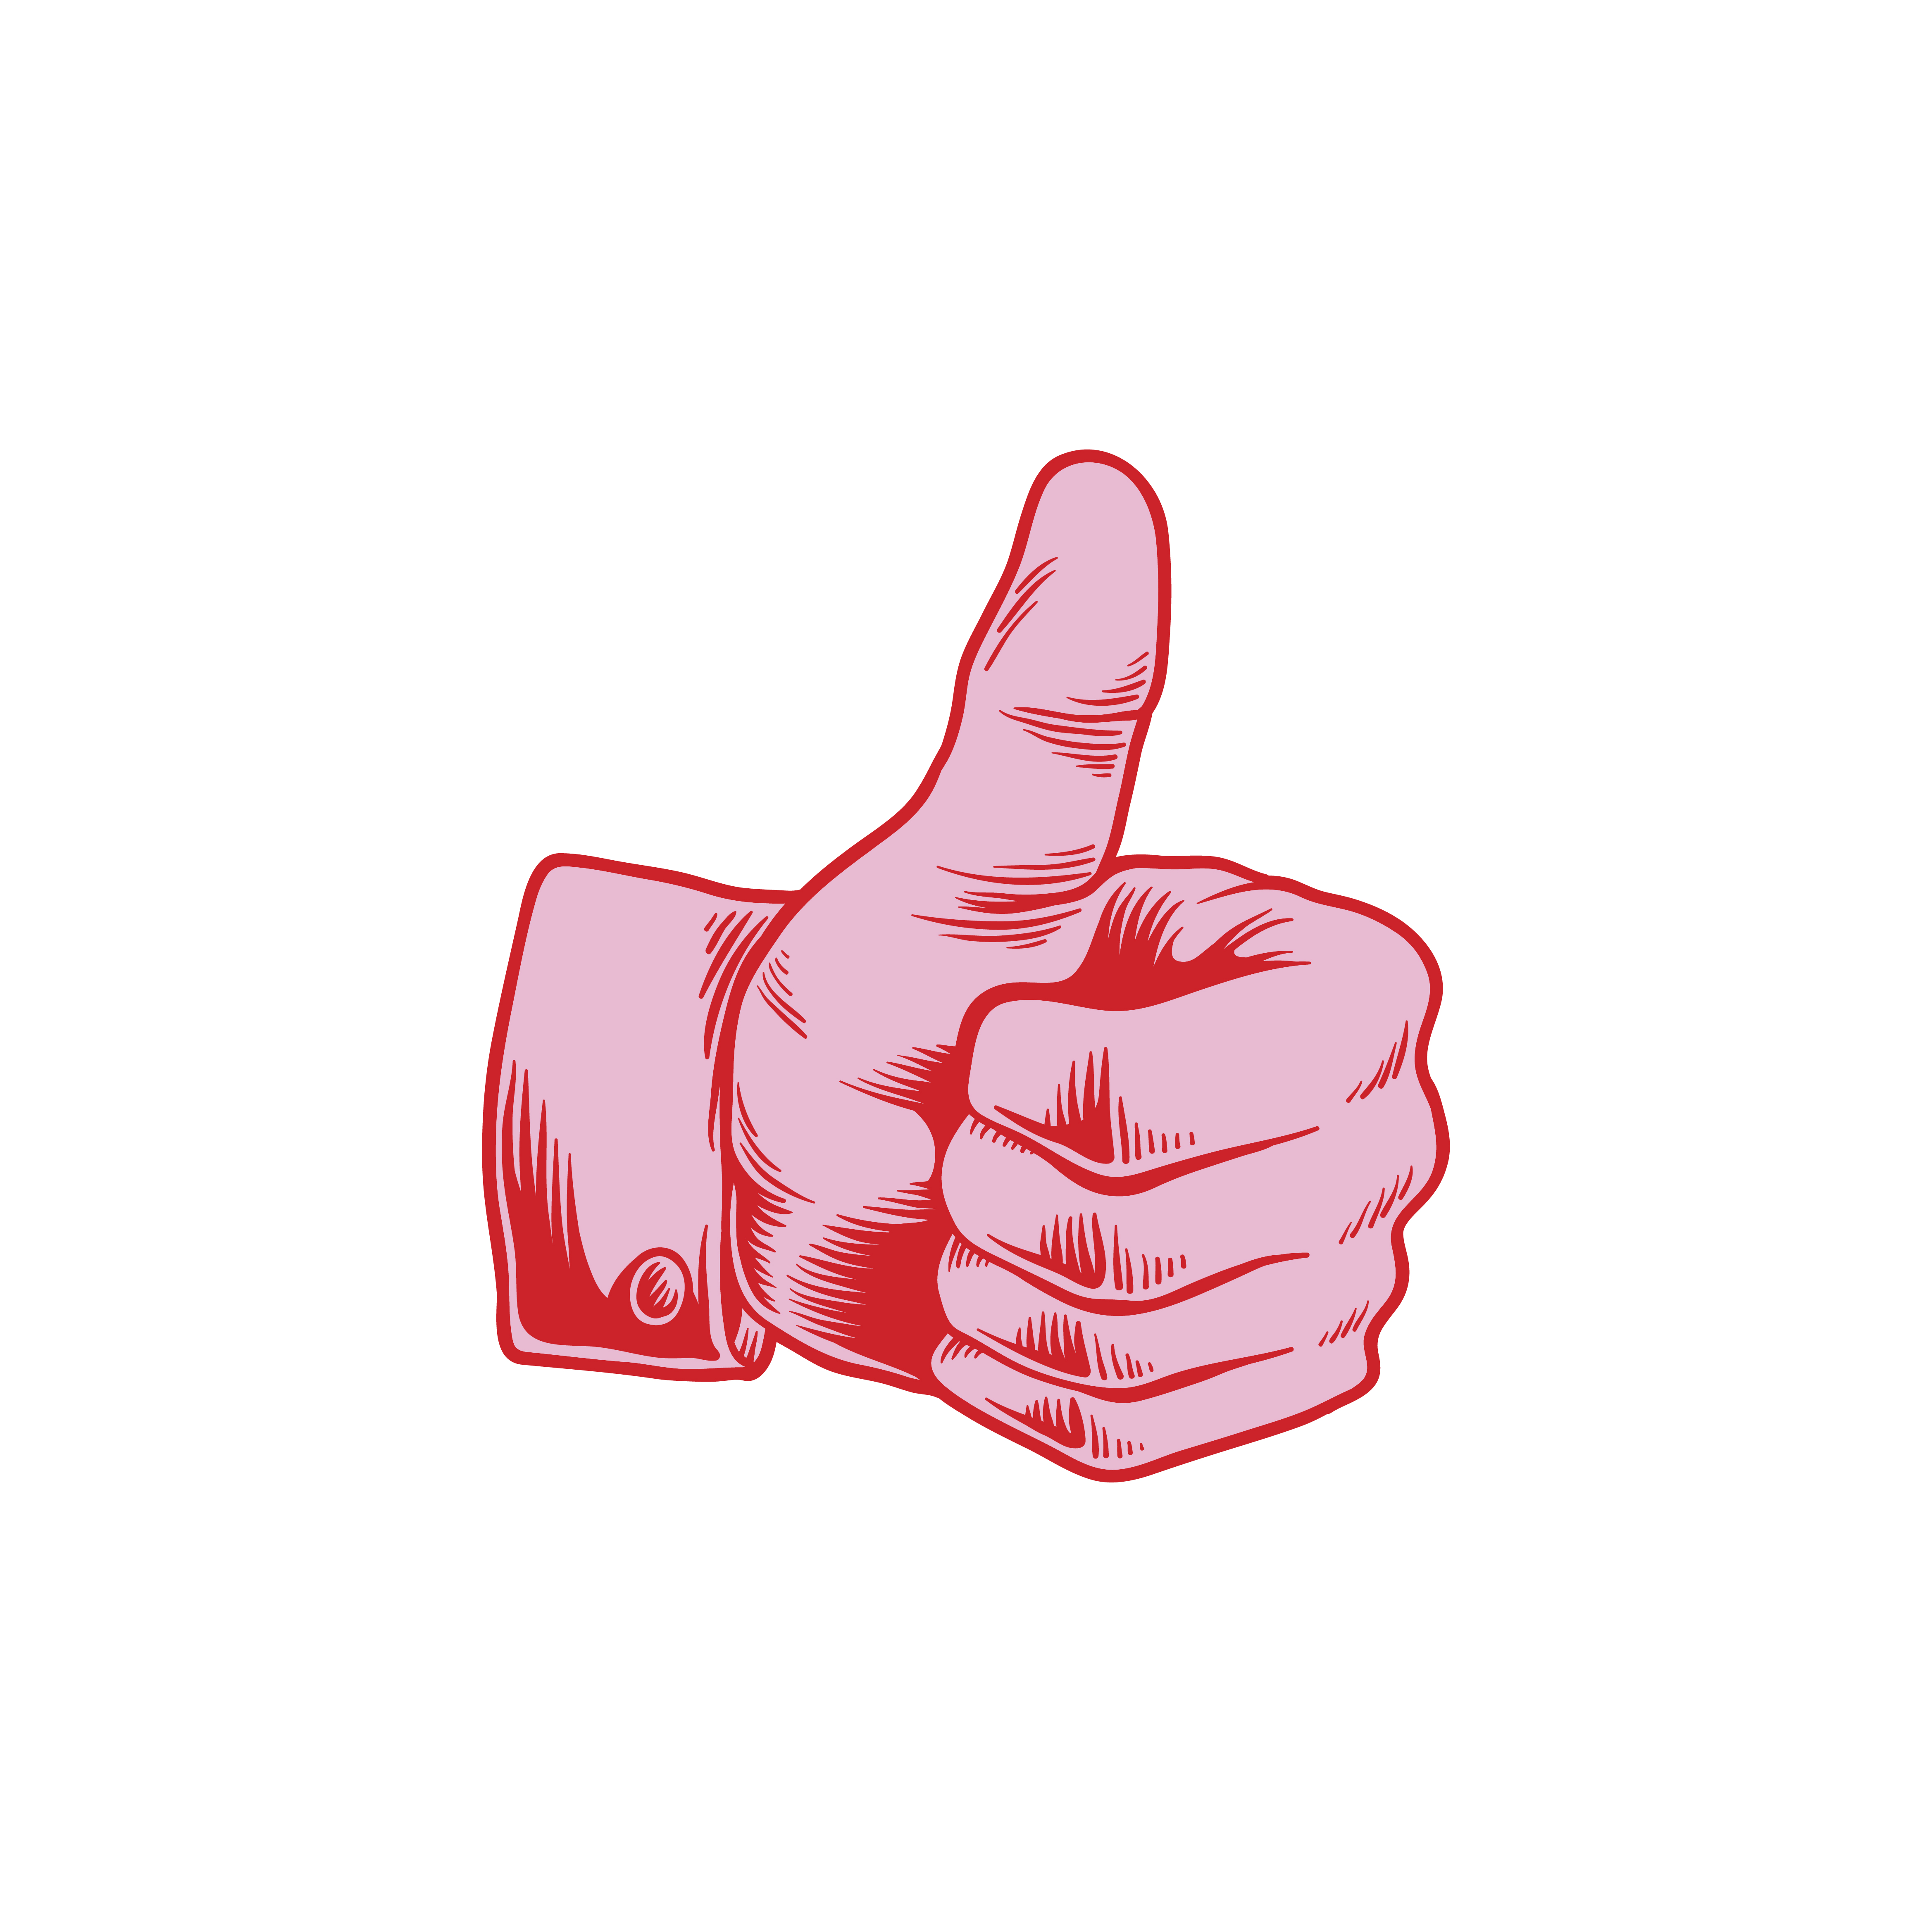 Illustration Of Thumbs Up Icon Download Free Vectors Clipart